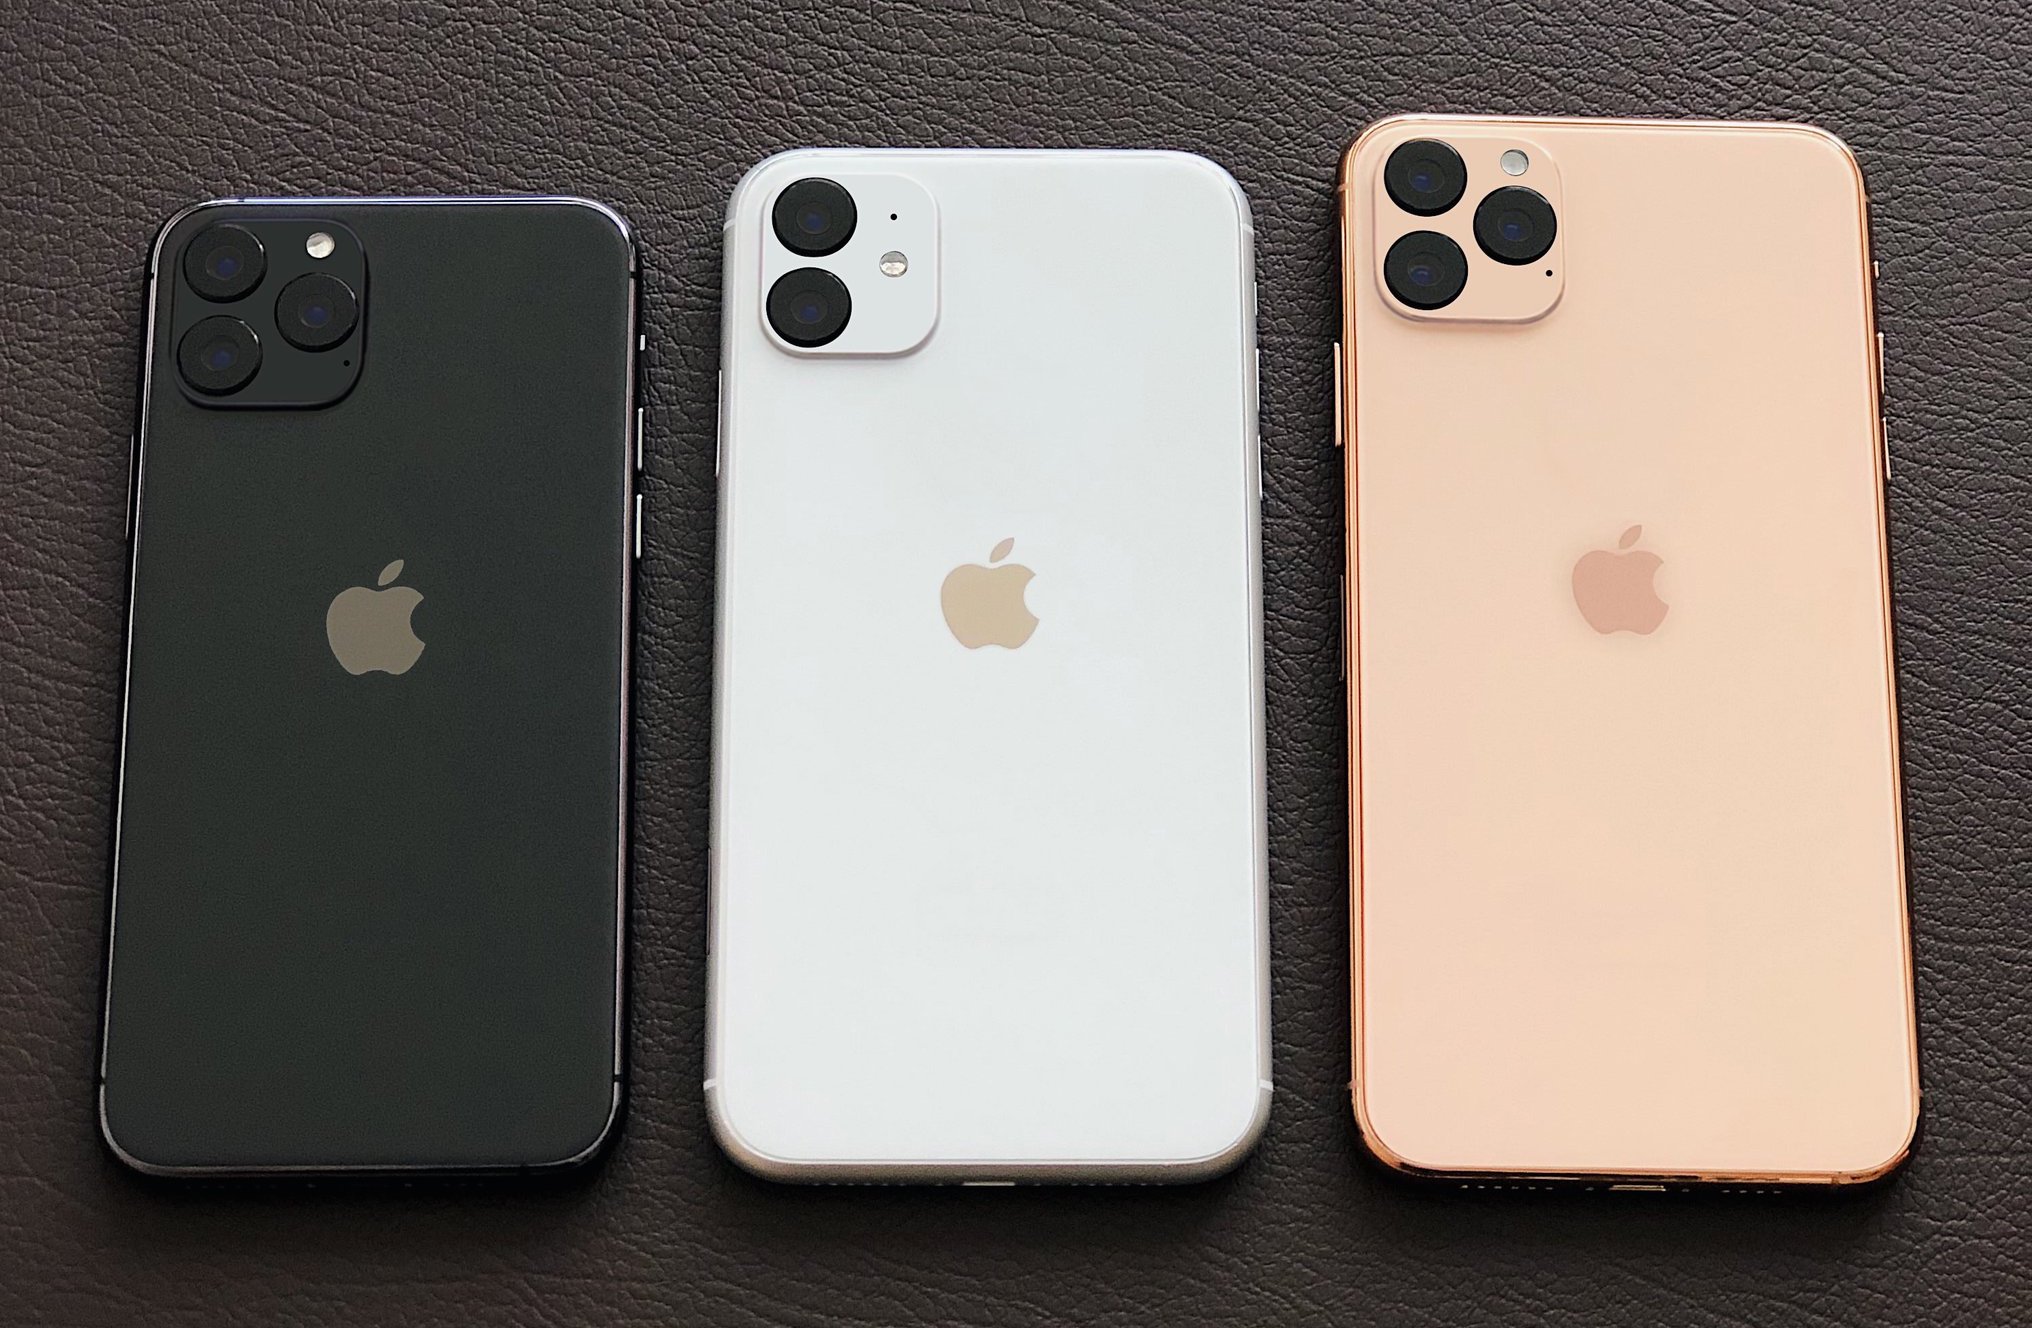 Cases show iPhone 11 design including new position of 